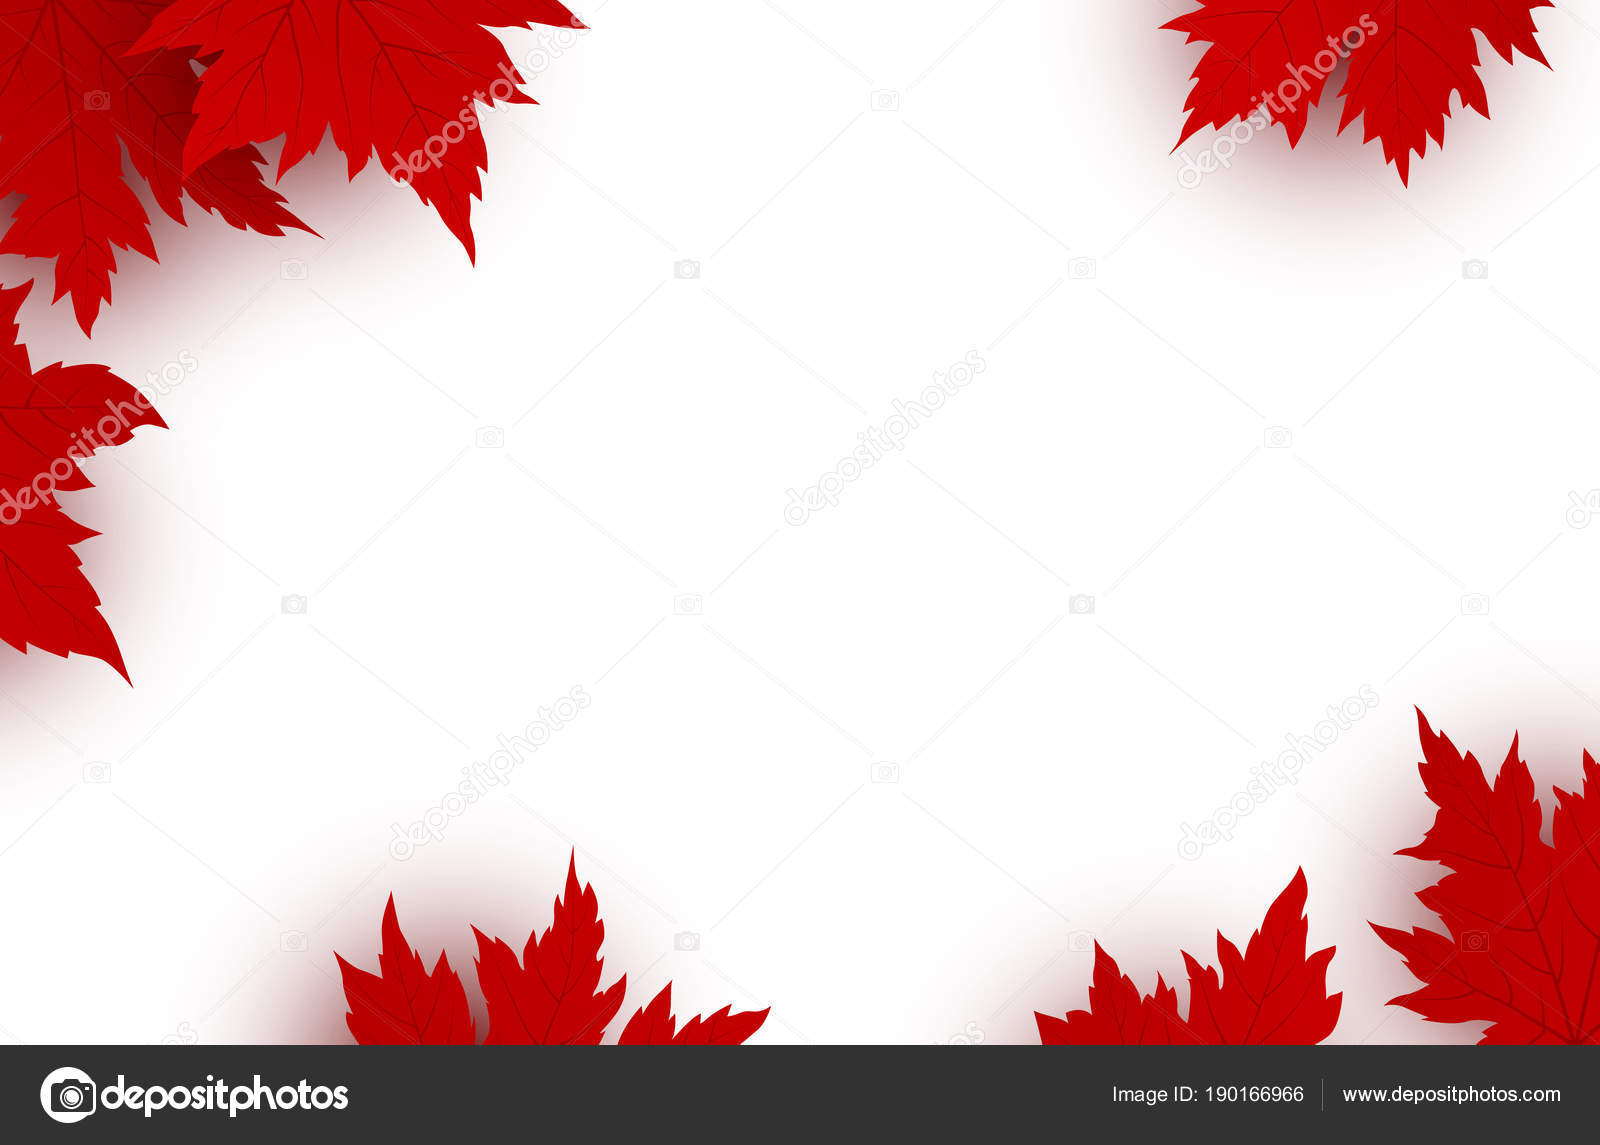 Canada day background design of red maple leaves isolated on white